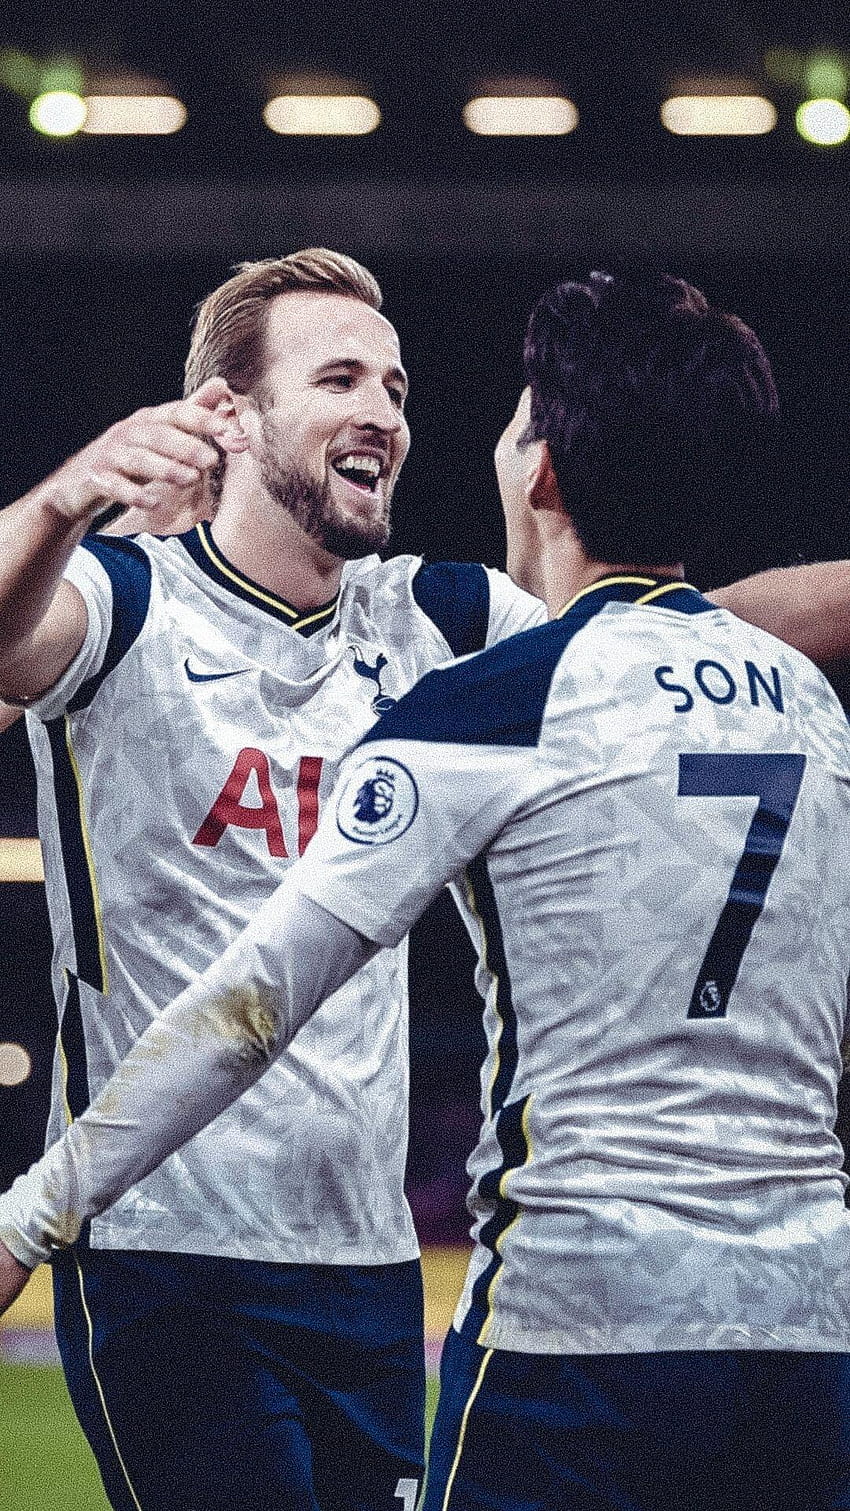 Spurs for Android, tottenham hotspur iphone HD phone wallpaper